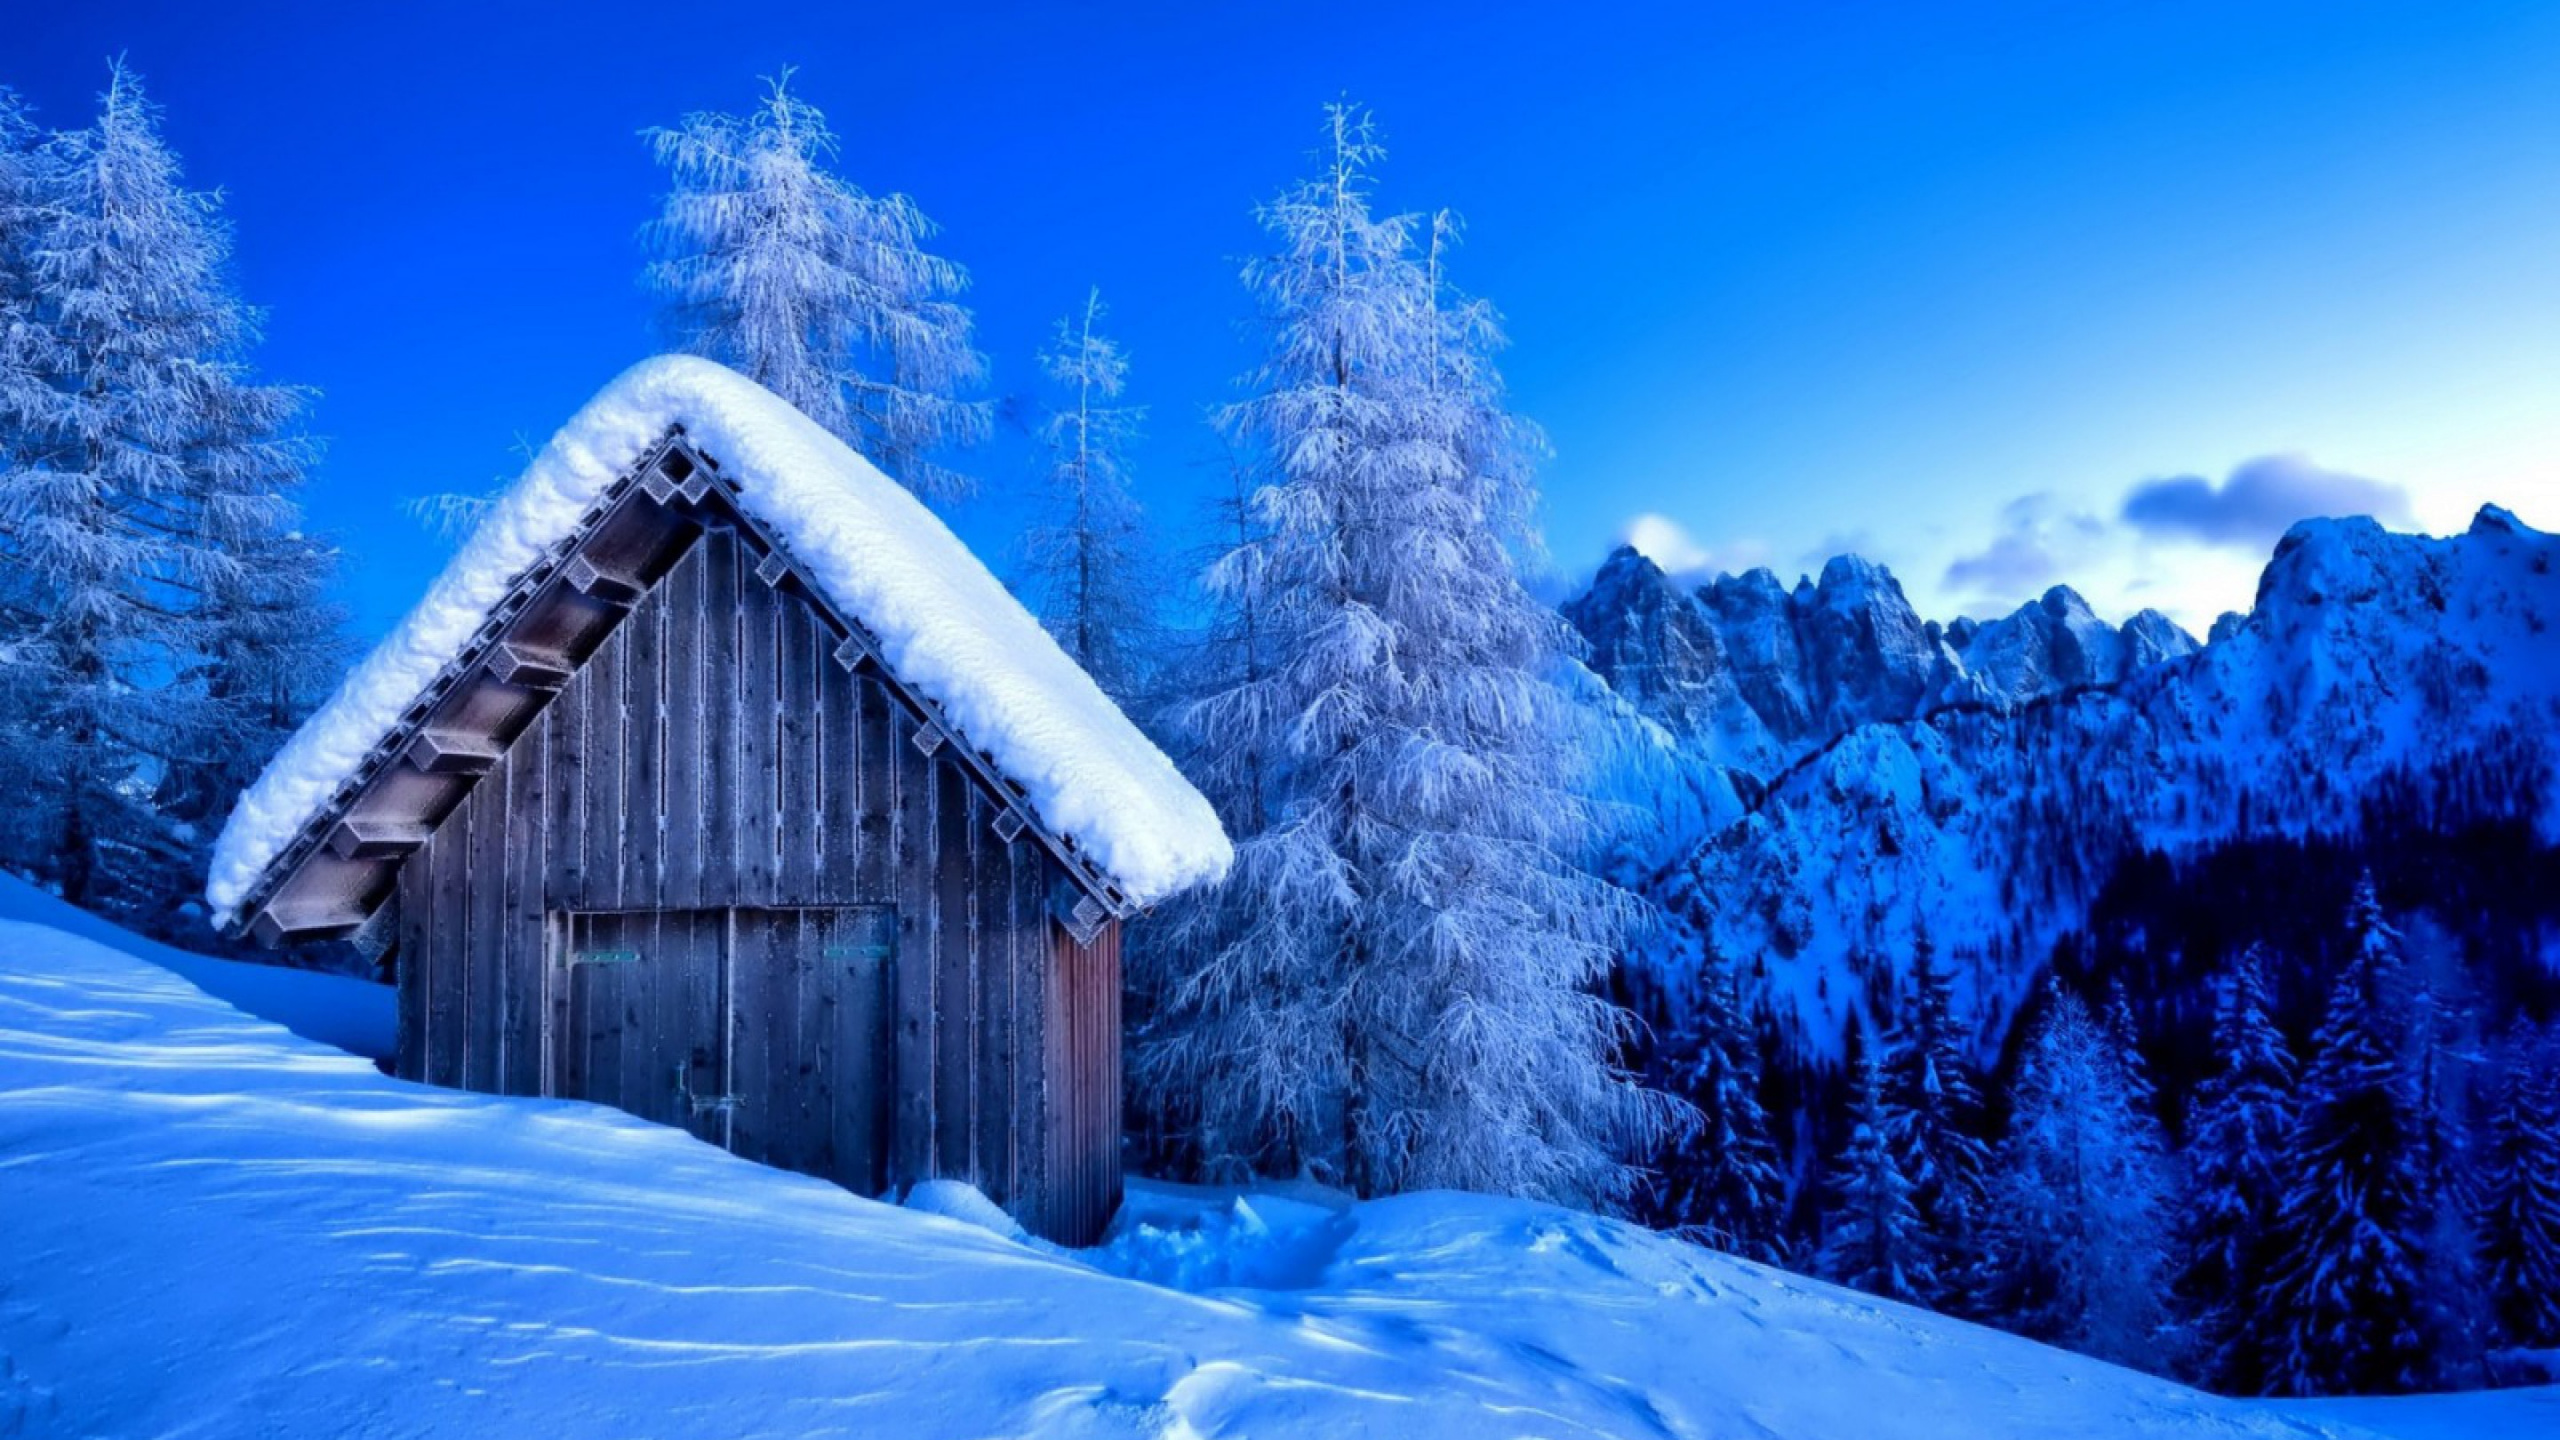 Brown Wooden House Near Snow Covered Pine Trees Under Blue Sky During Daytime. Wallpaper in 2560x1440 Resolution